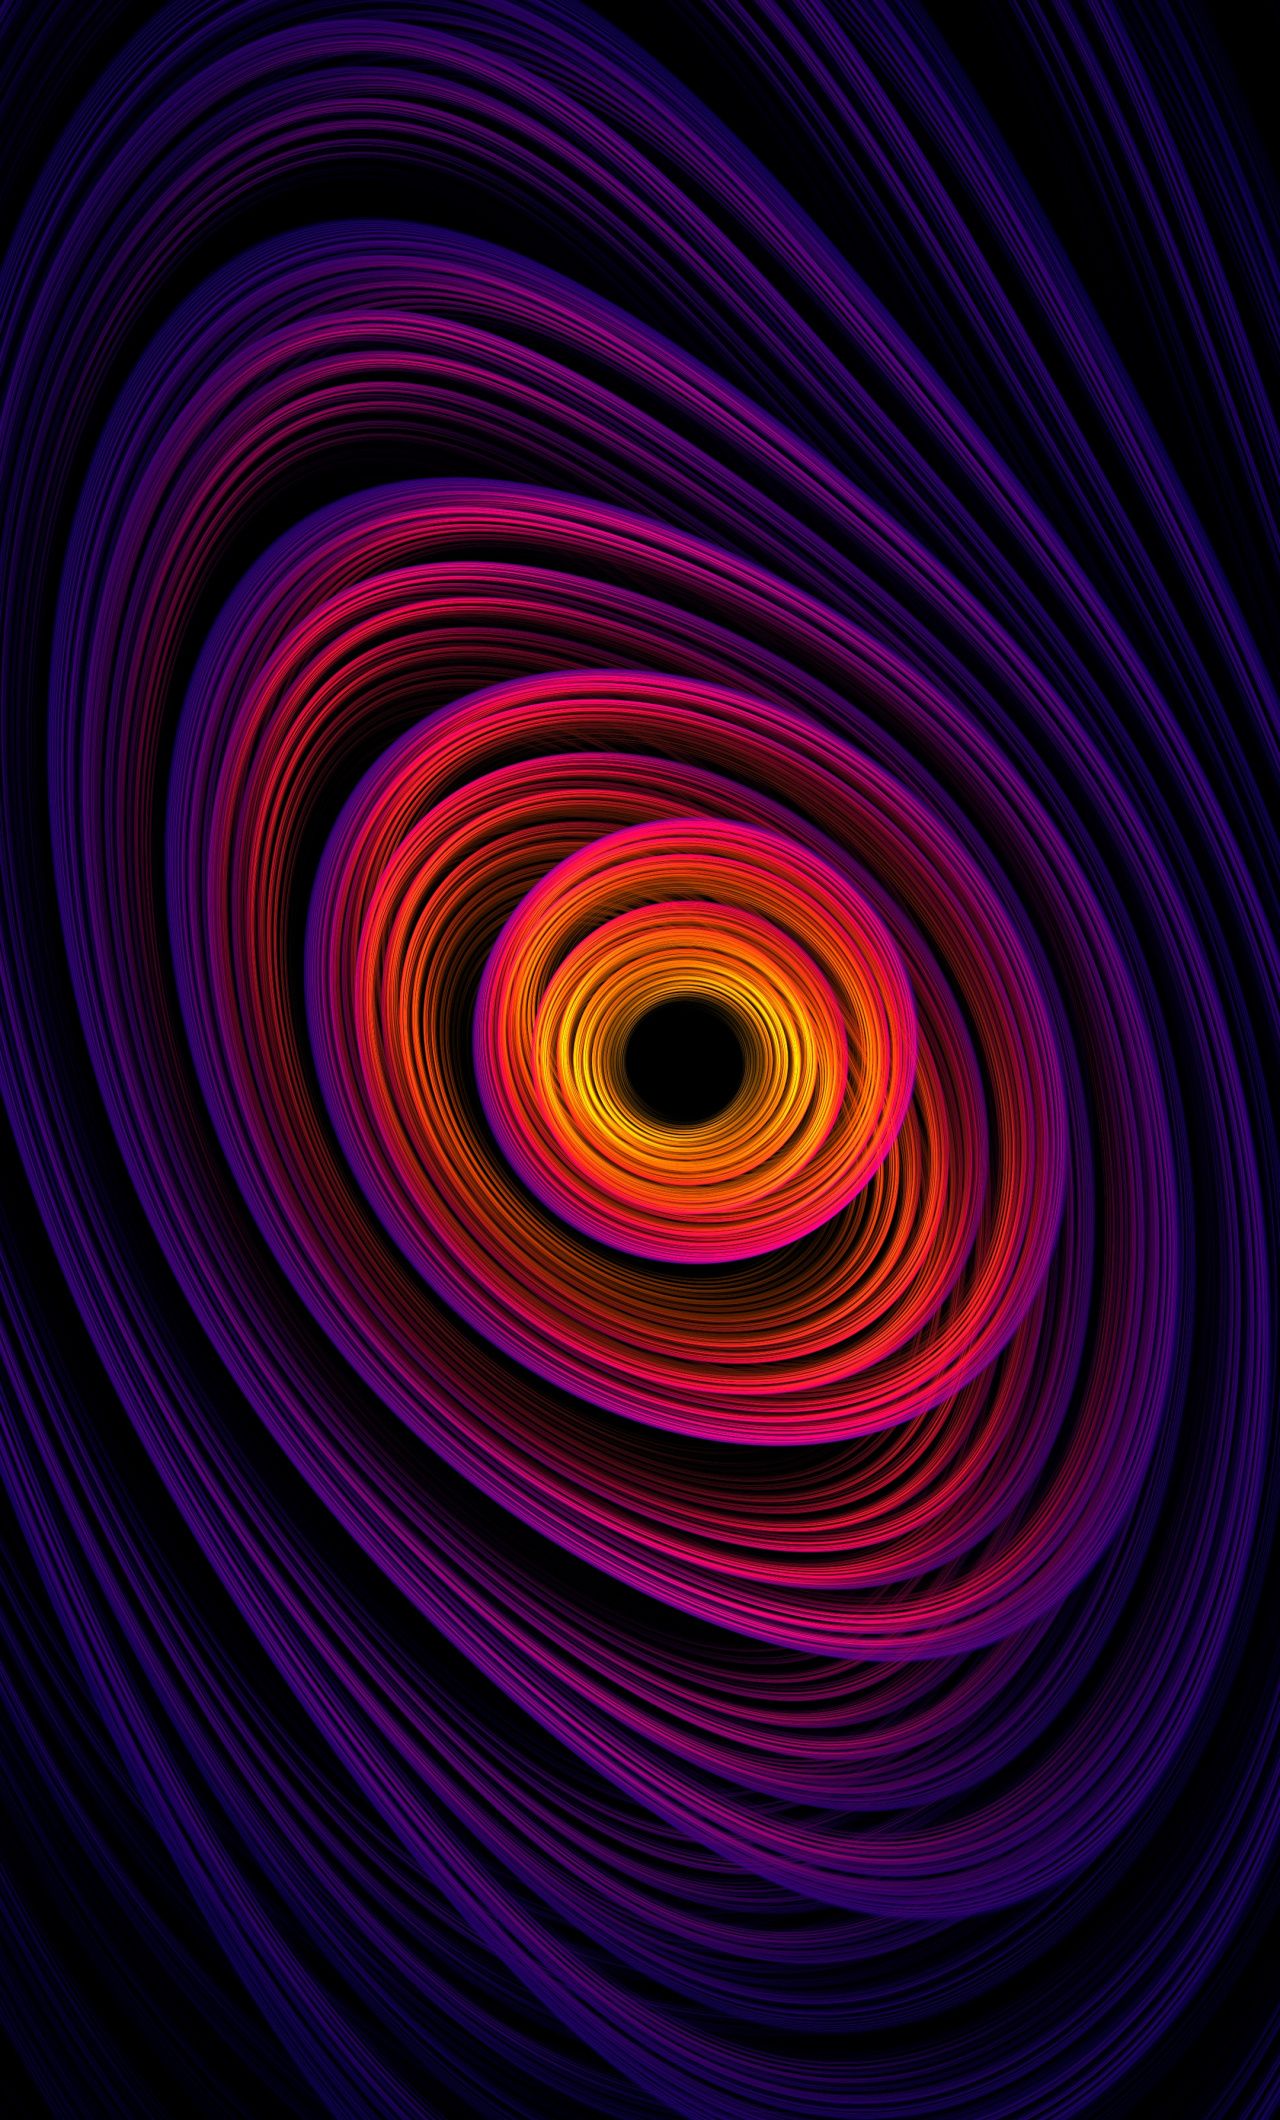 Download Spiral, shapes, abstract wallpaper, 1280x iPhone 6 Plus